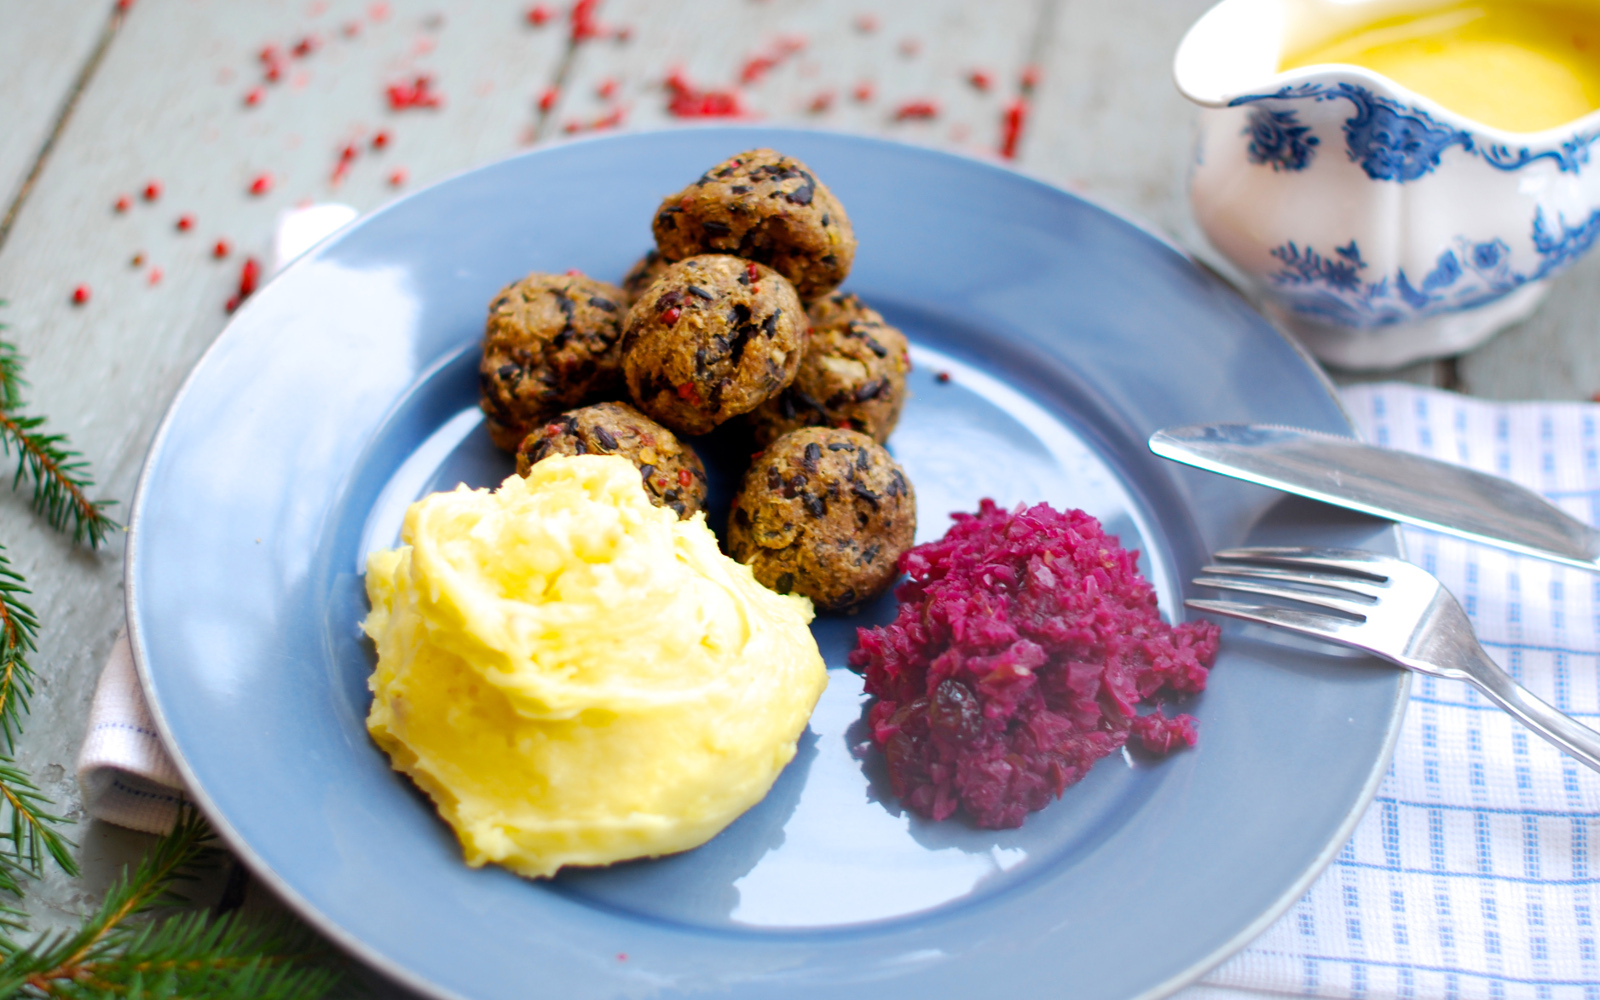 Swedish Meatballs With Lentils and Black Rice